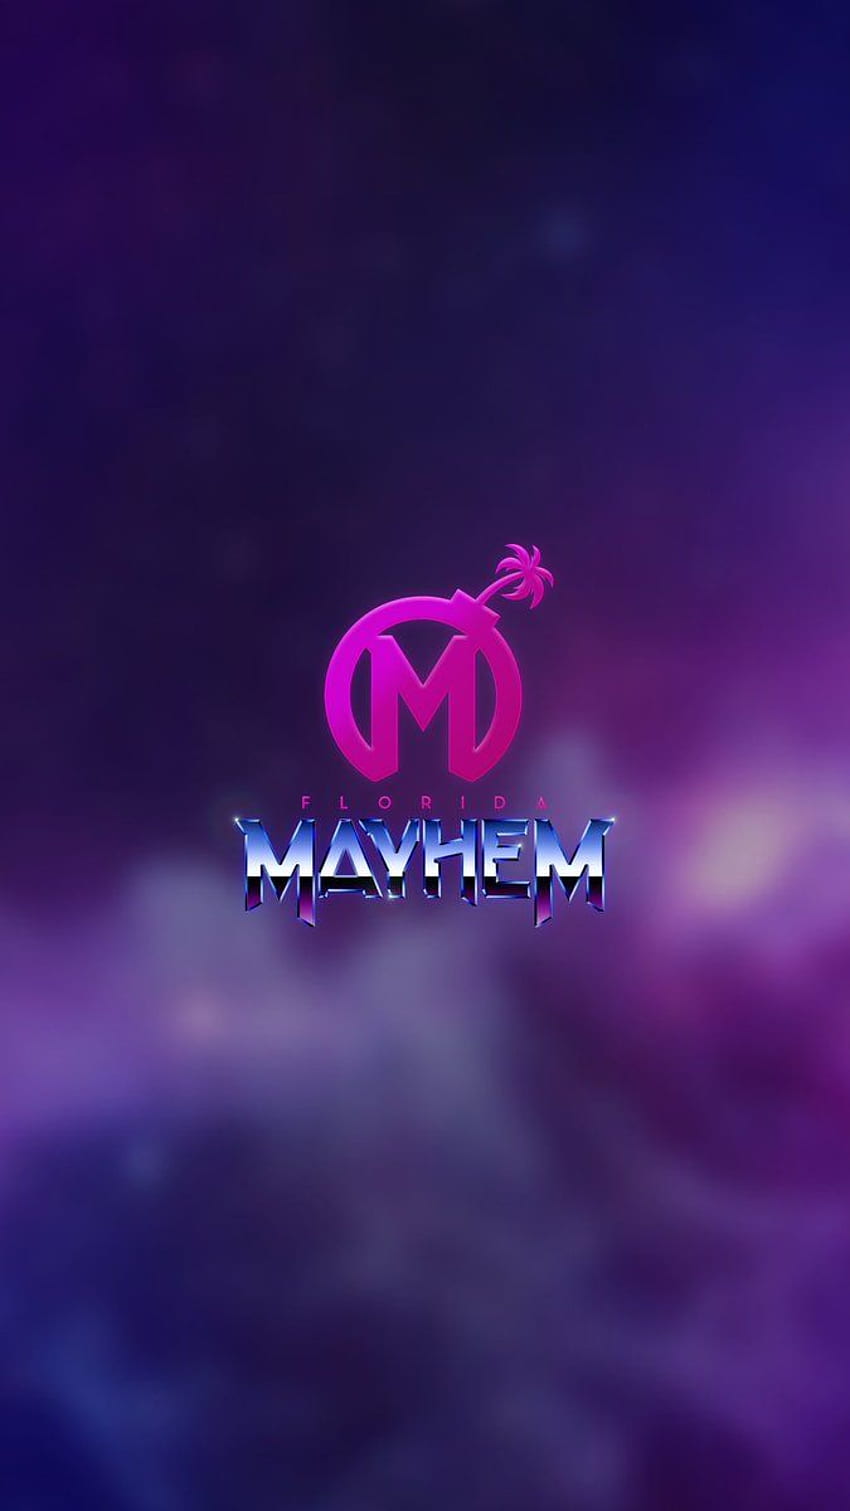 Florida Mayhem Are Ready for OWL 2021 - It's time to swap out your current PC and mobile . Let us help you out with that! HD phone wallpaper